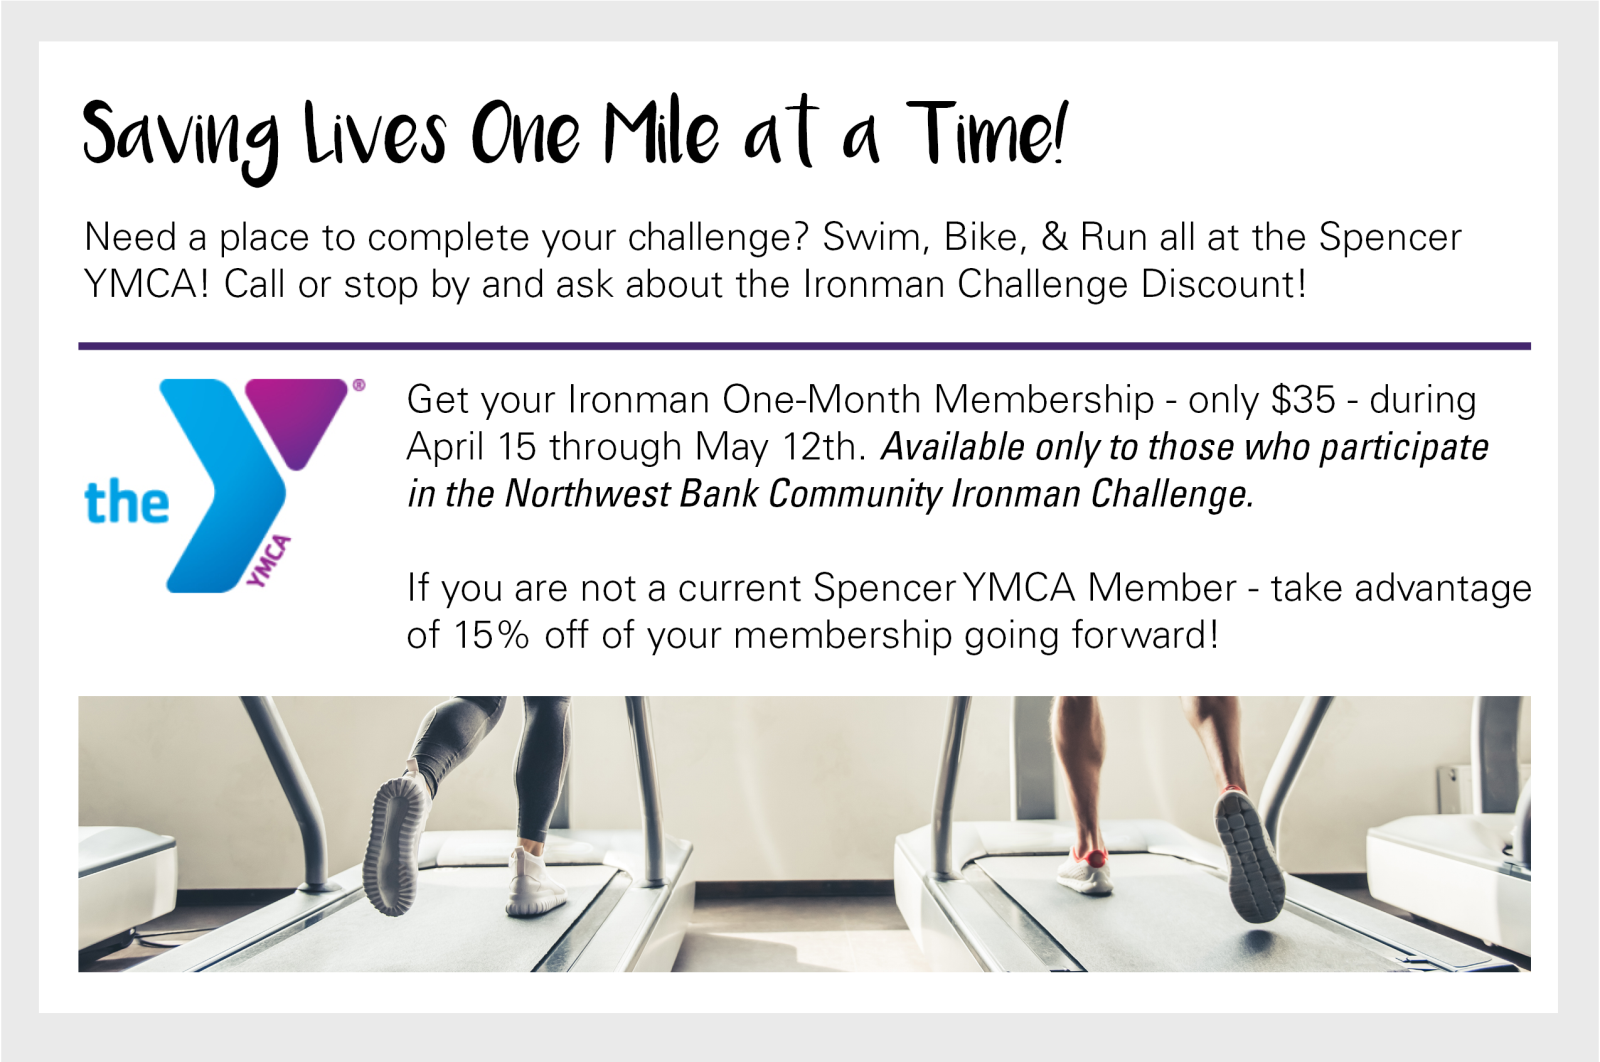 Call or stop by the spencer family YMCA and ask about the Ironman Challenge membership discount!